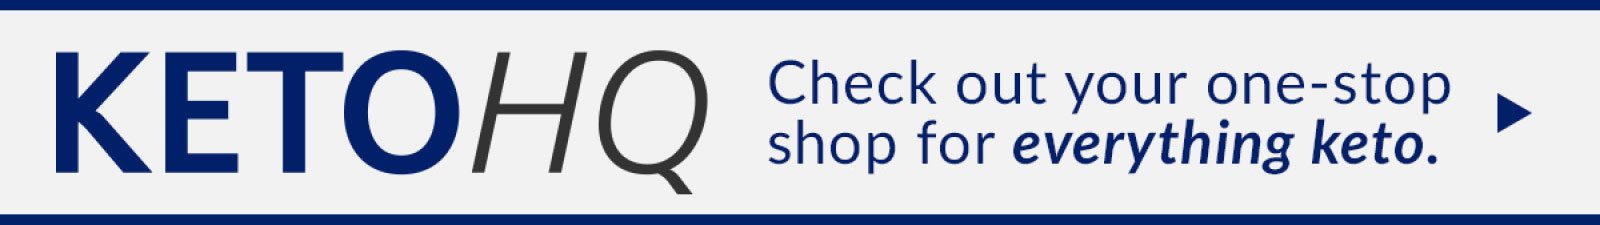 KETOHQ | Check out your one-stop shop for everything keto.